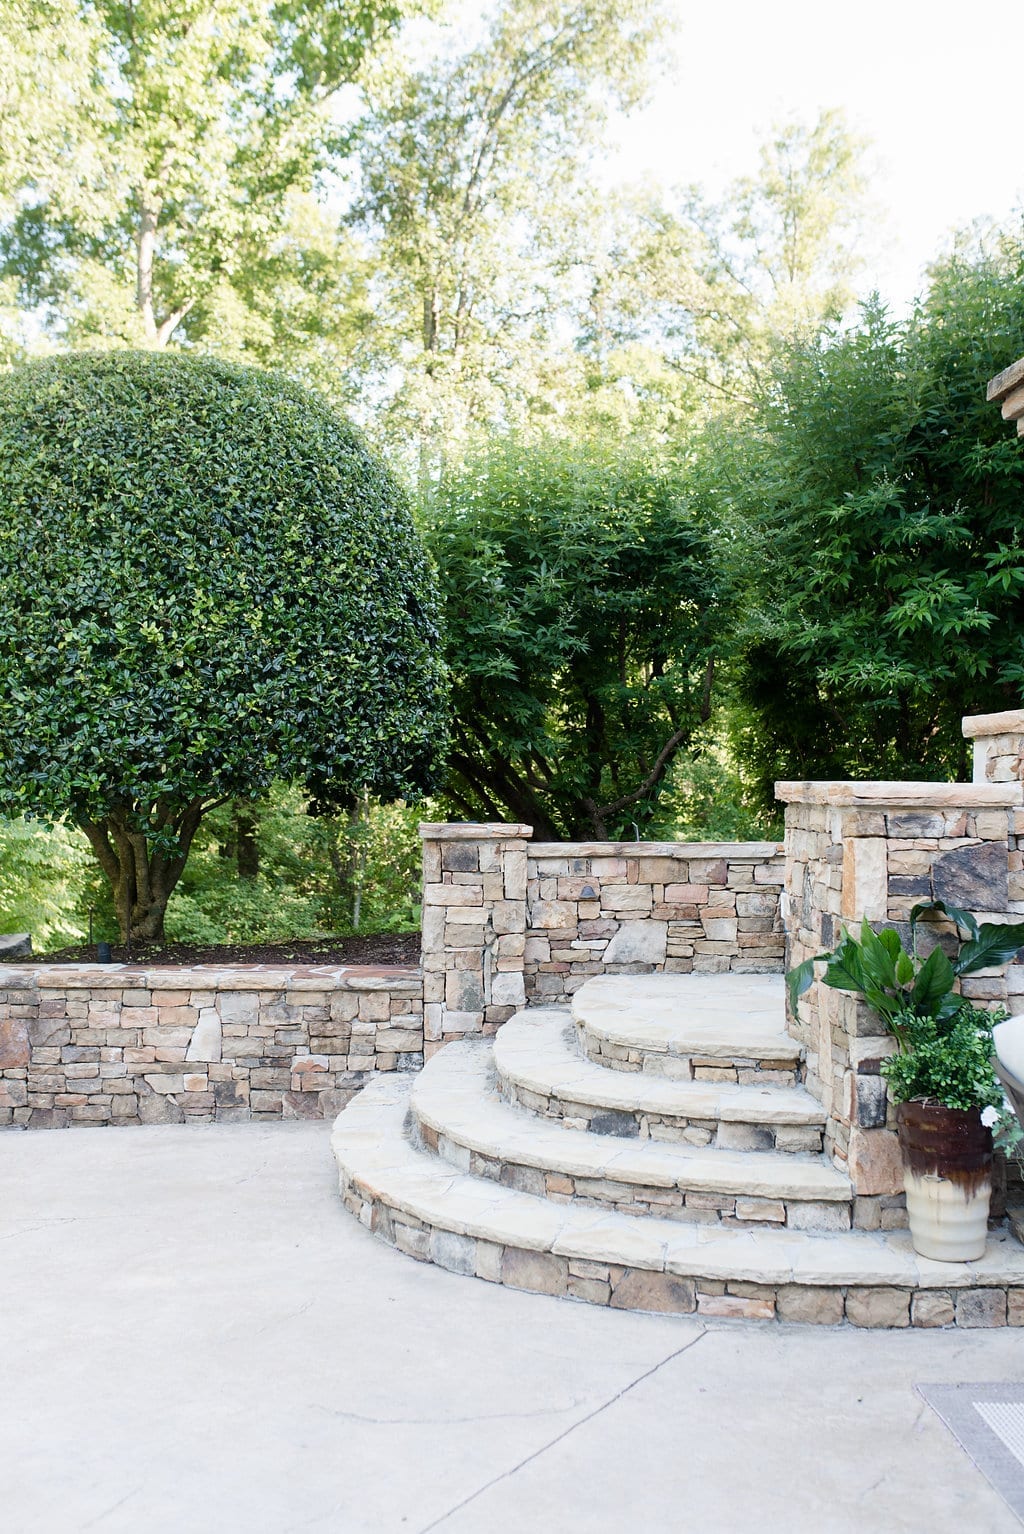 Concrete and stone stairs lead up from a pool deck area surrounded by two Vitex trees and one shaped Holly tree.